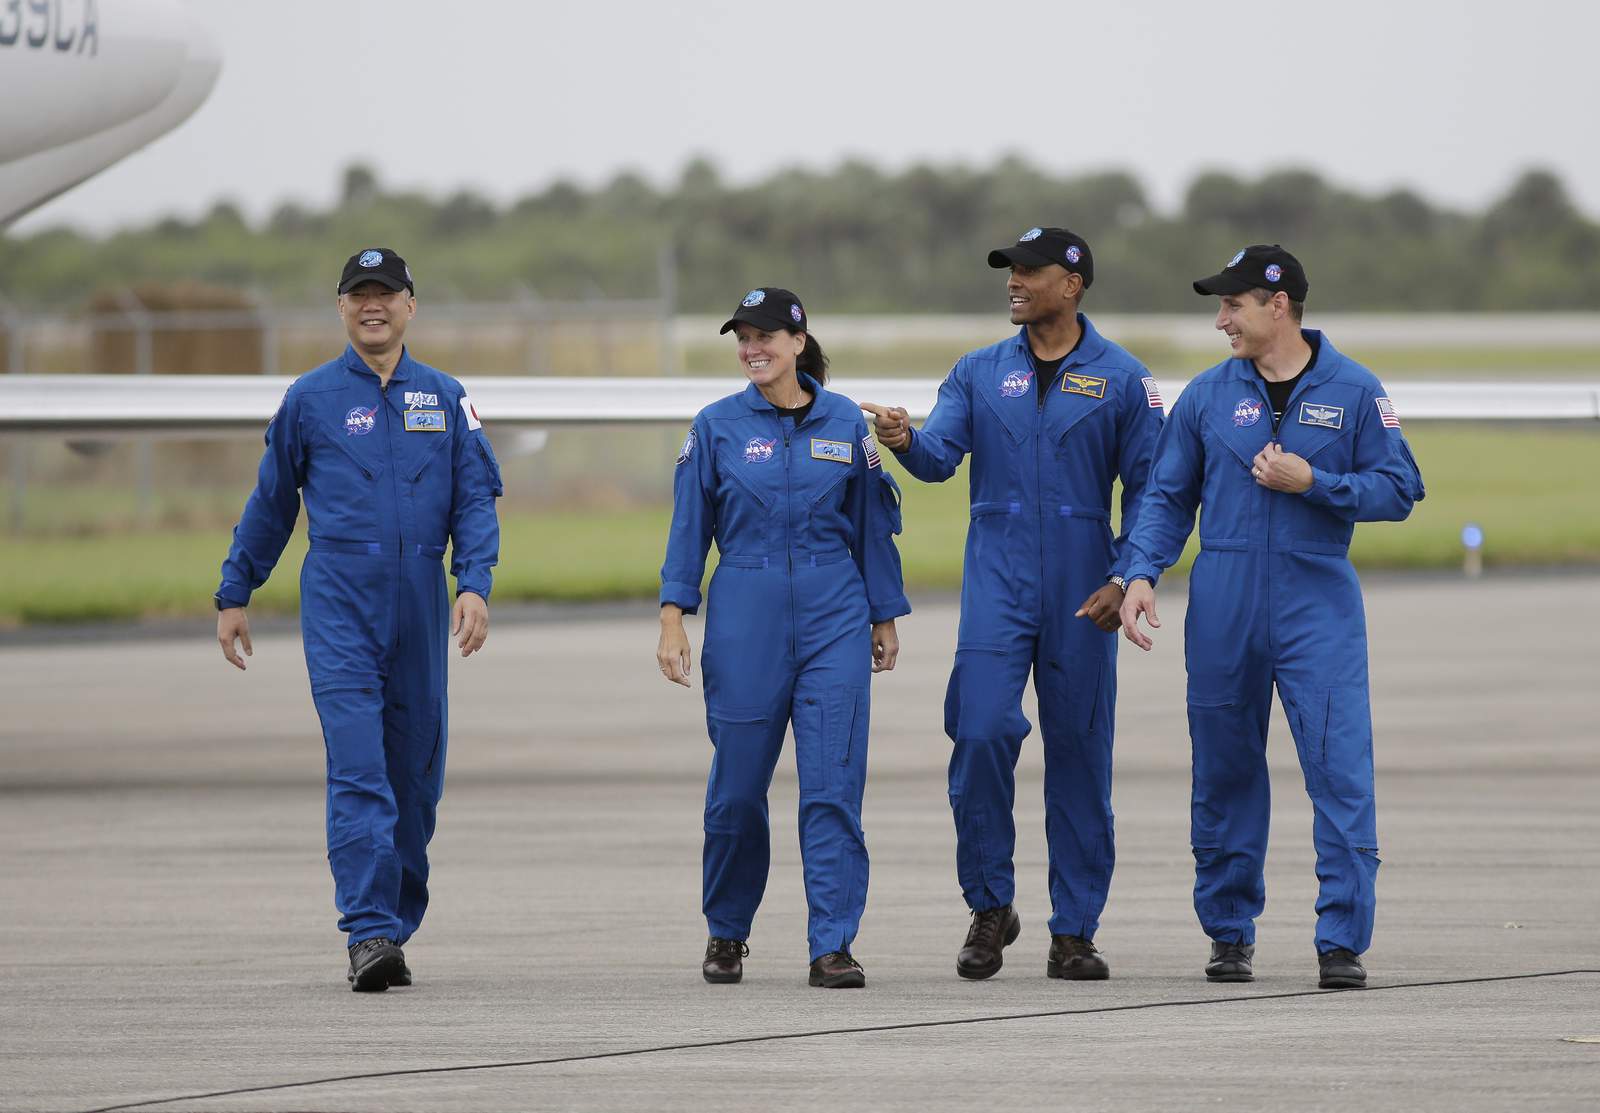 Astronauts arrive at launch site for 2nd SpaceX crew flight